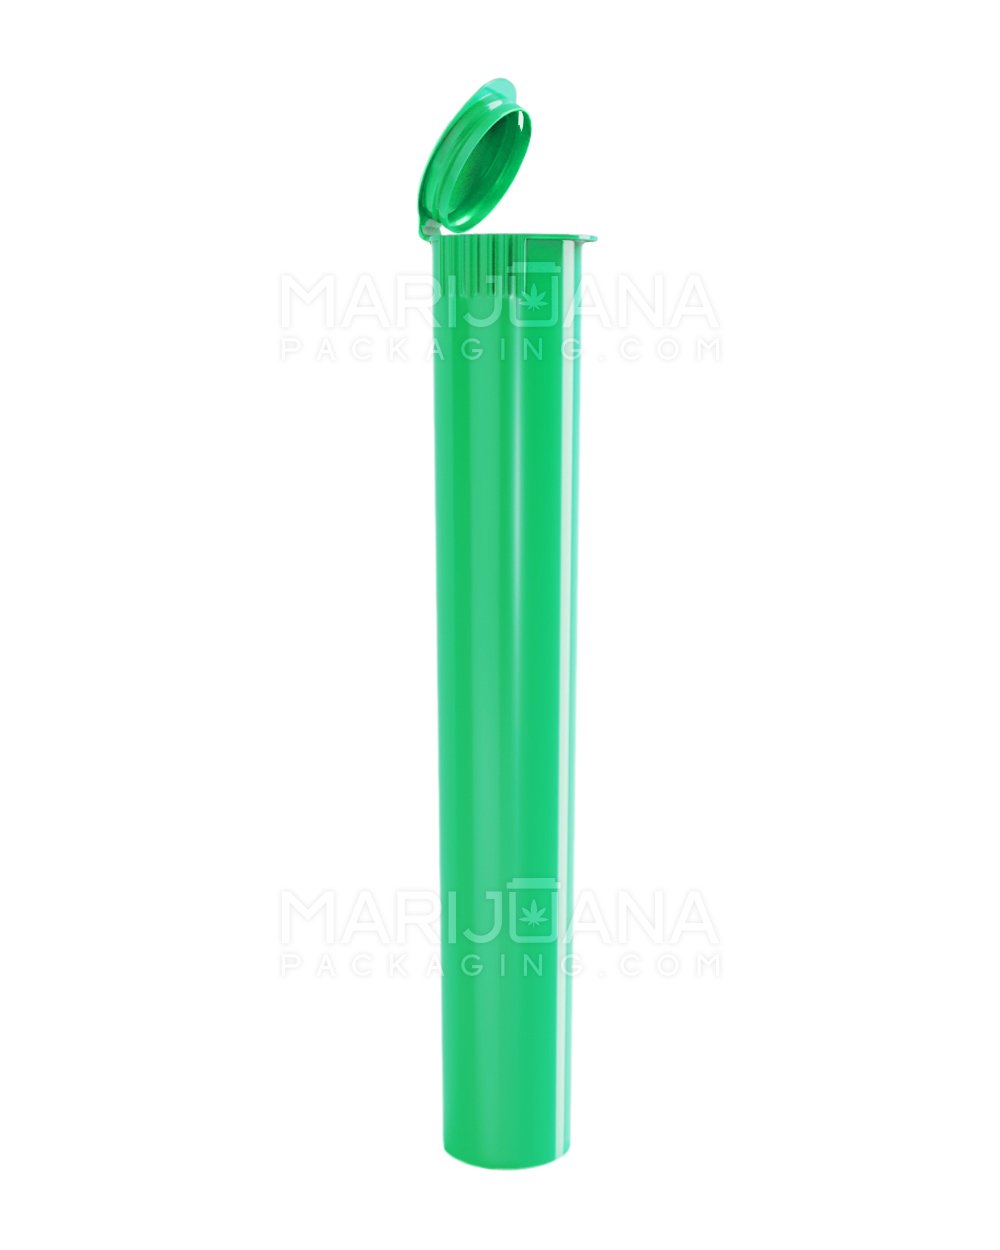 Child Resistant | King Size Pop Top Opaque Plastic Pre-Roll Tubes | 116mm - Green - 1000 Count - 1